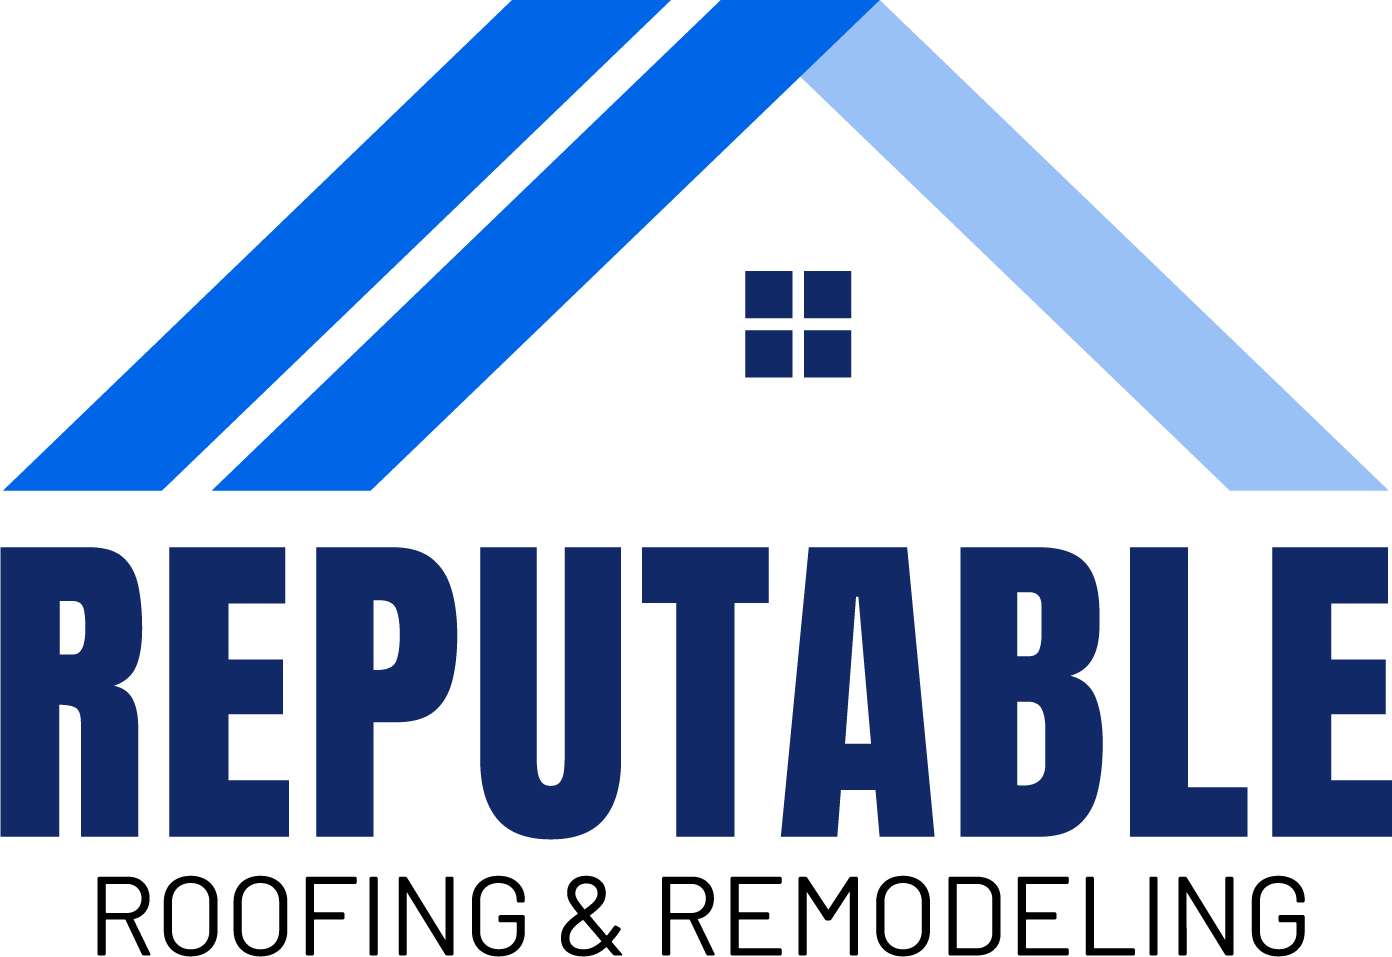 Reputable Roofing & Remodeling